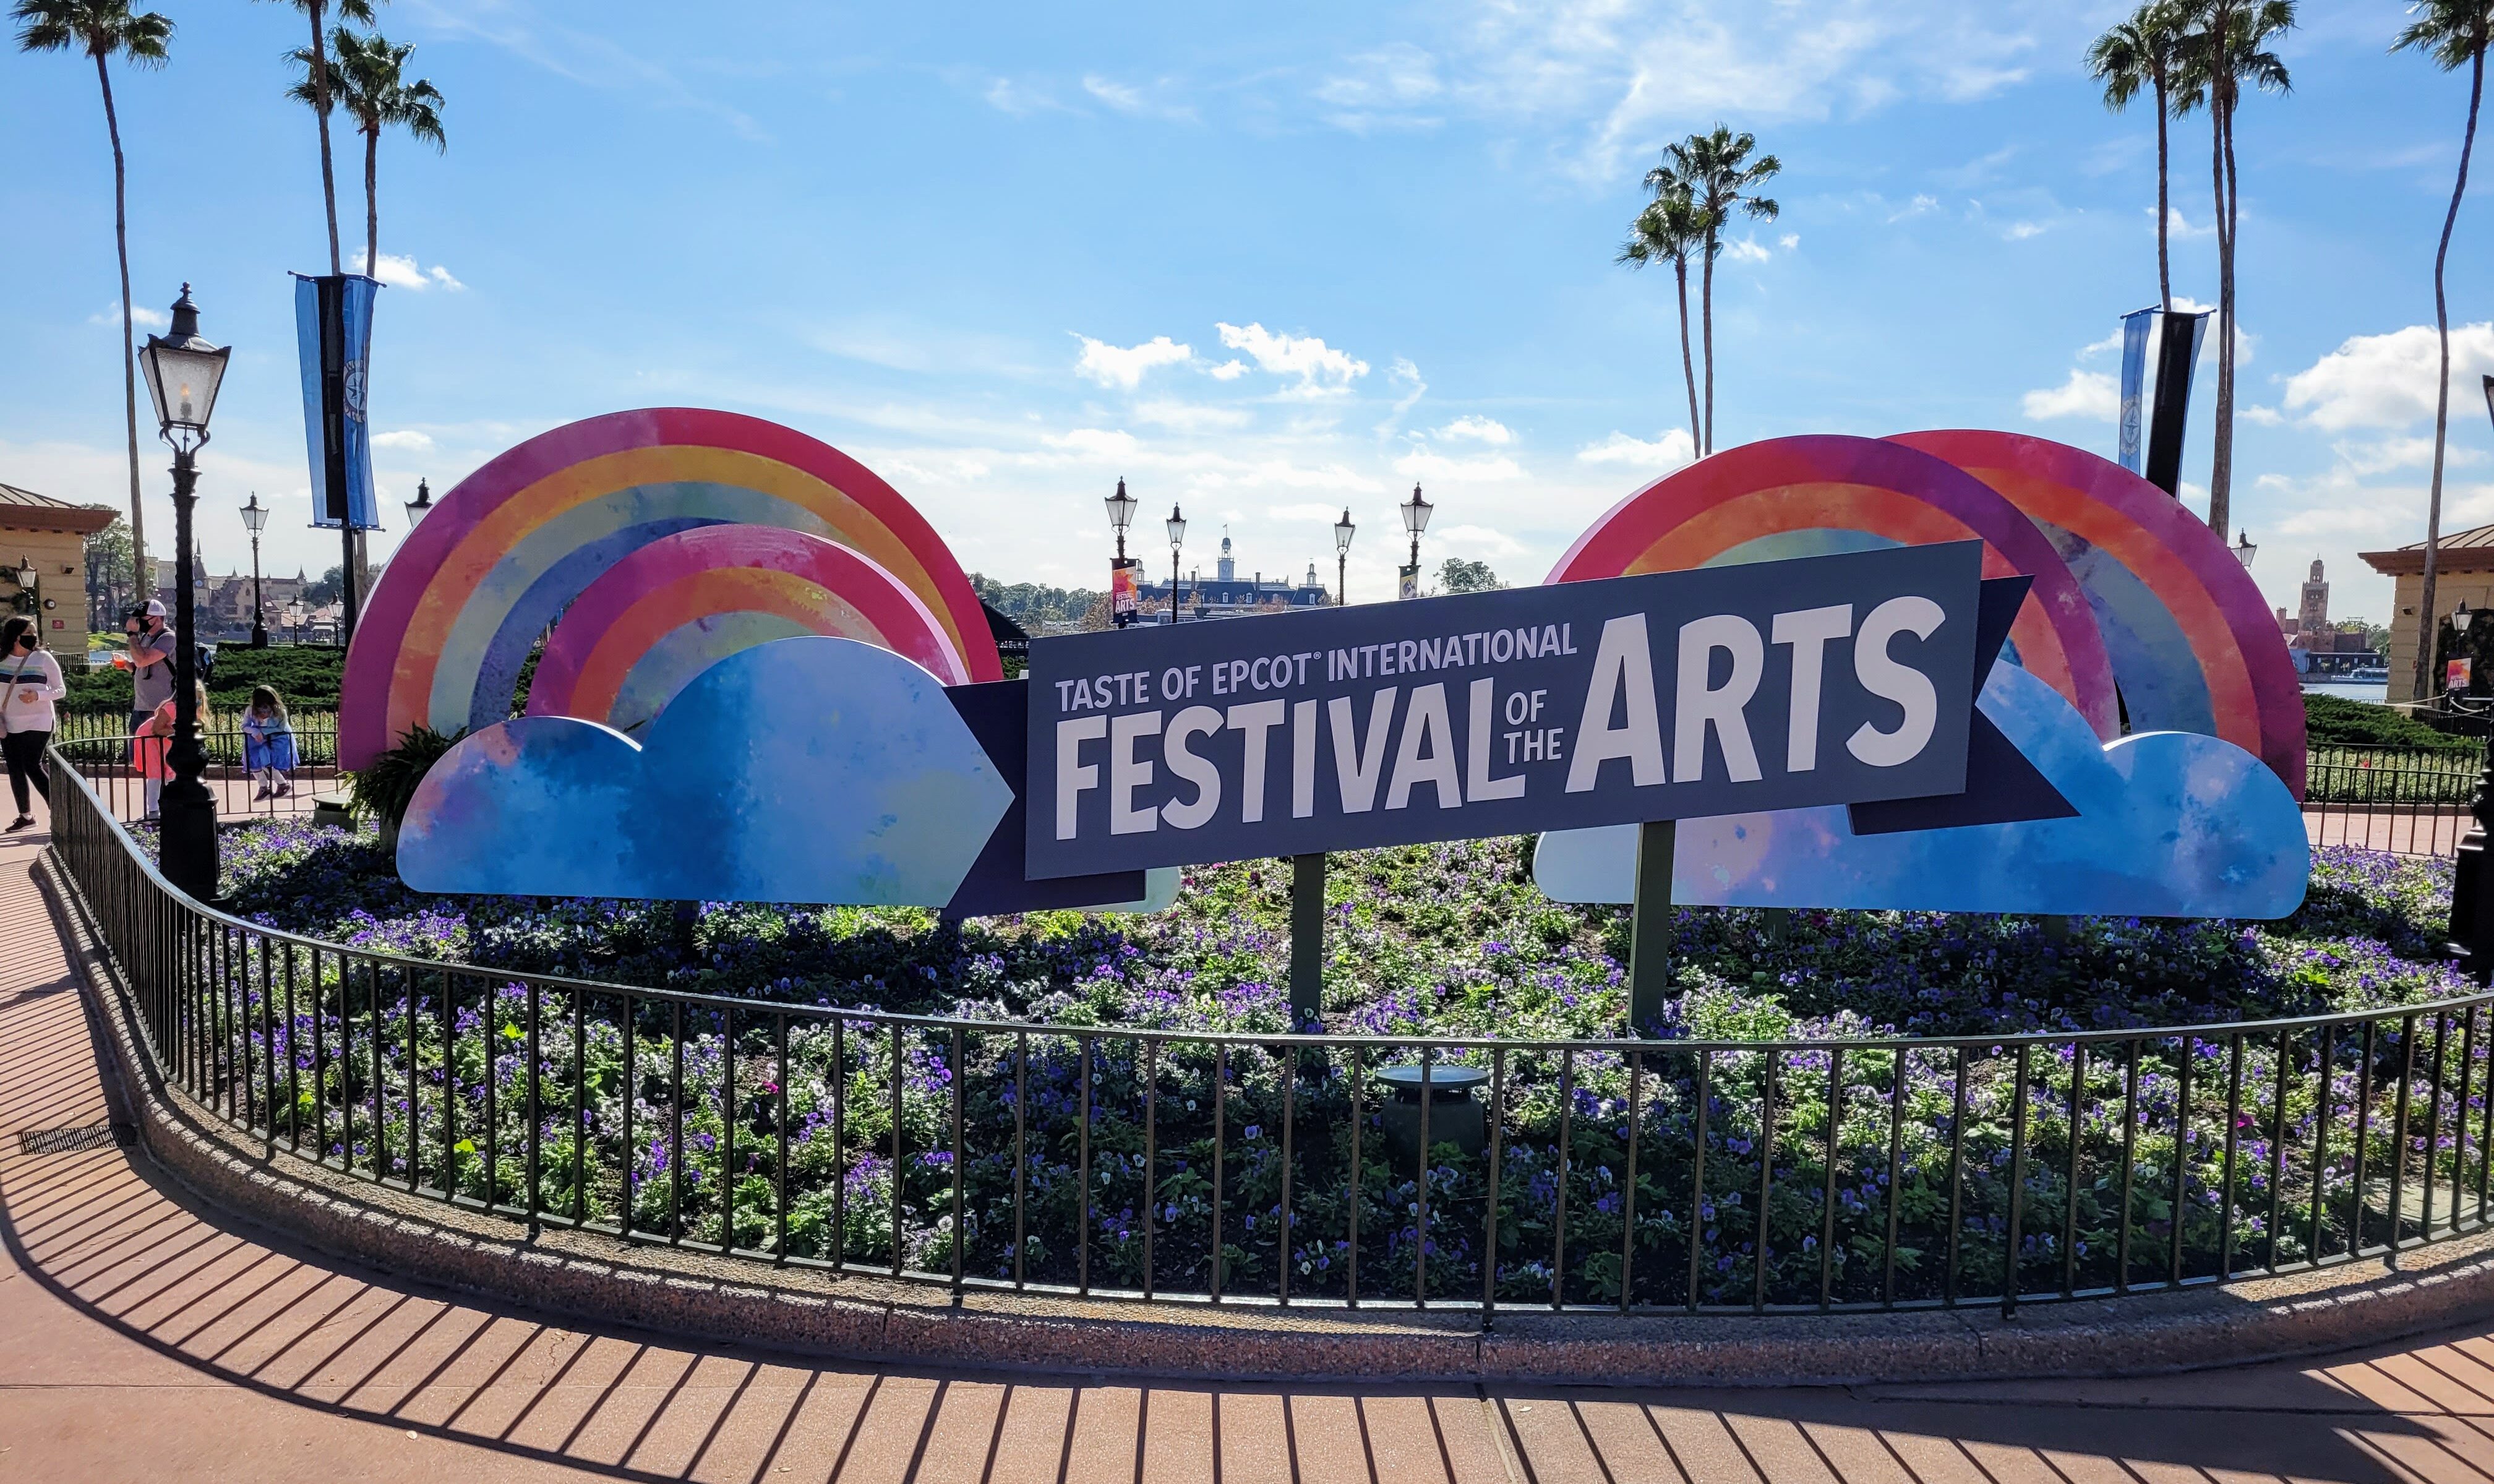 Festival of the Arts 2021 at Epcot